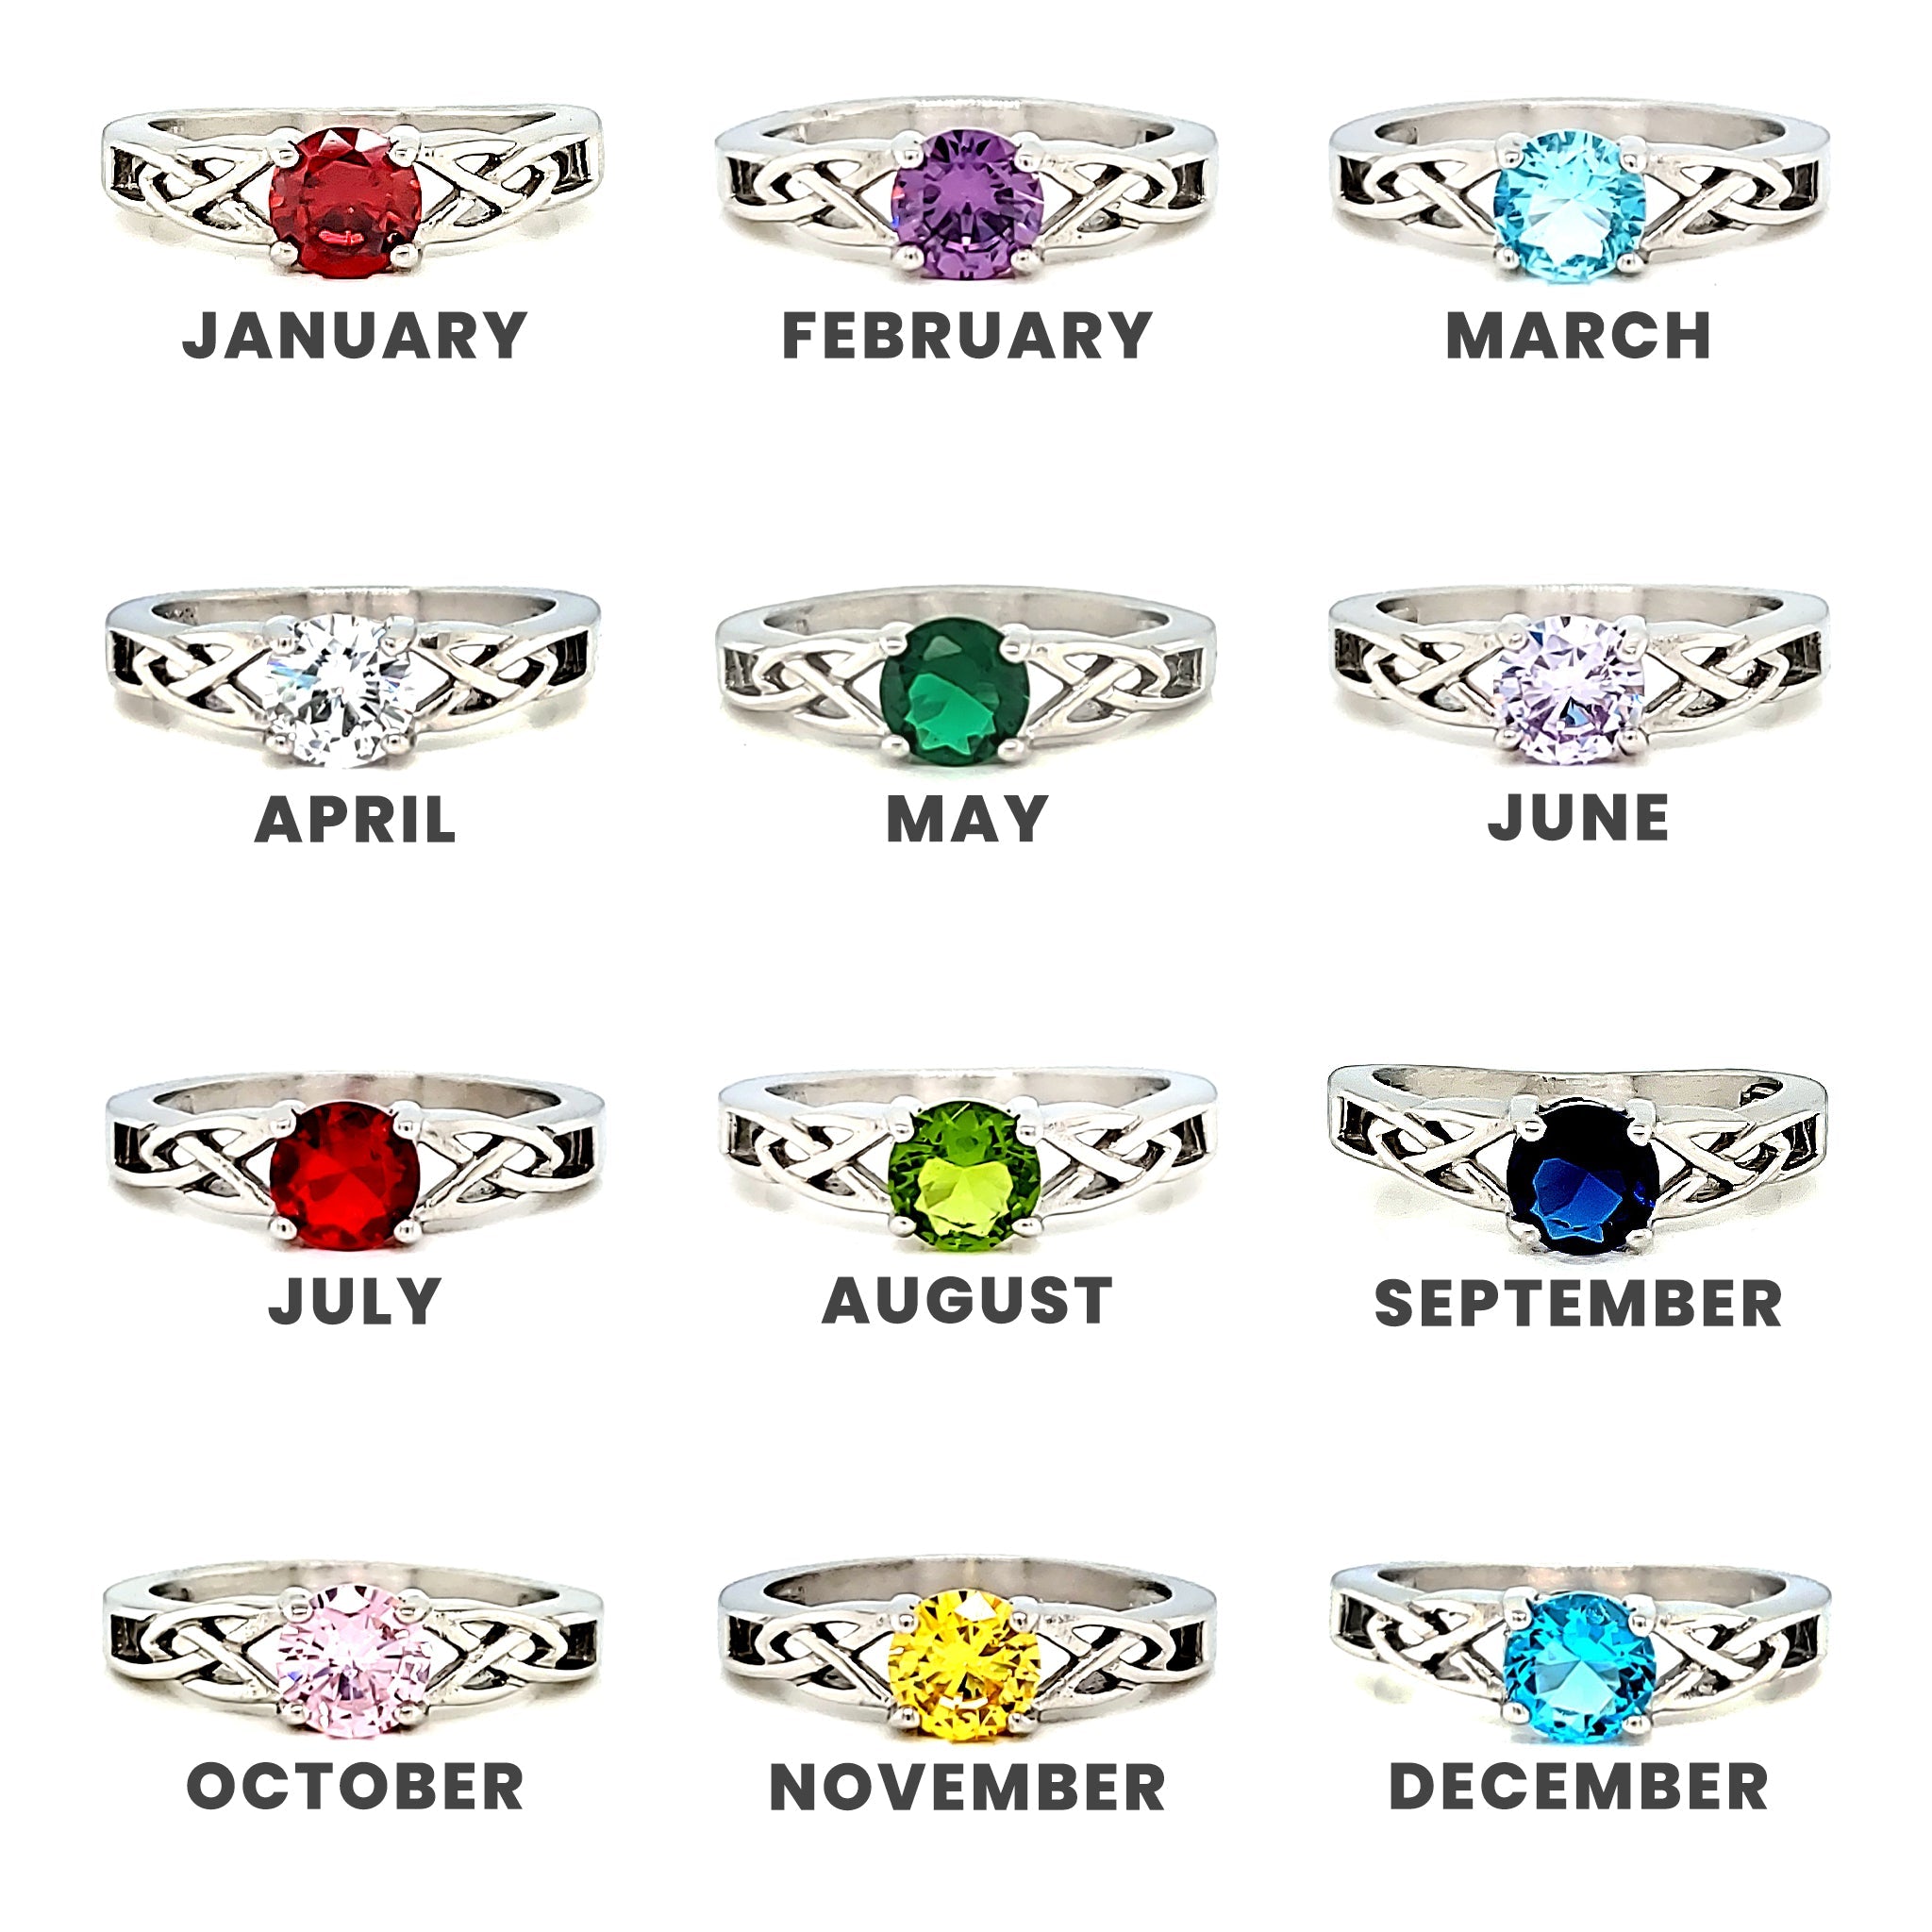 Stainless steel CZ stone Celtic rings in a variety of colors with their associated birth months.